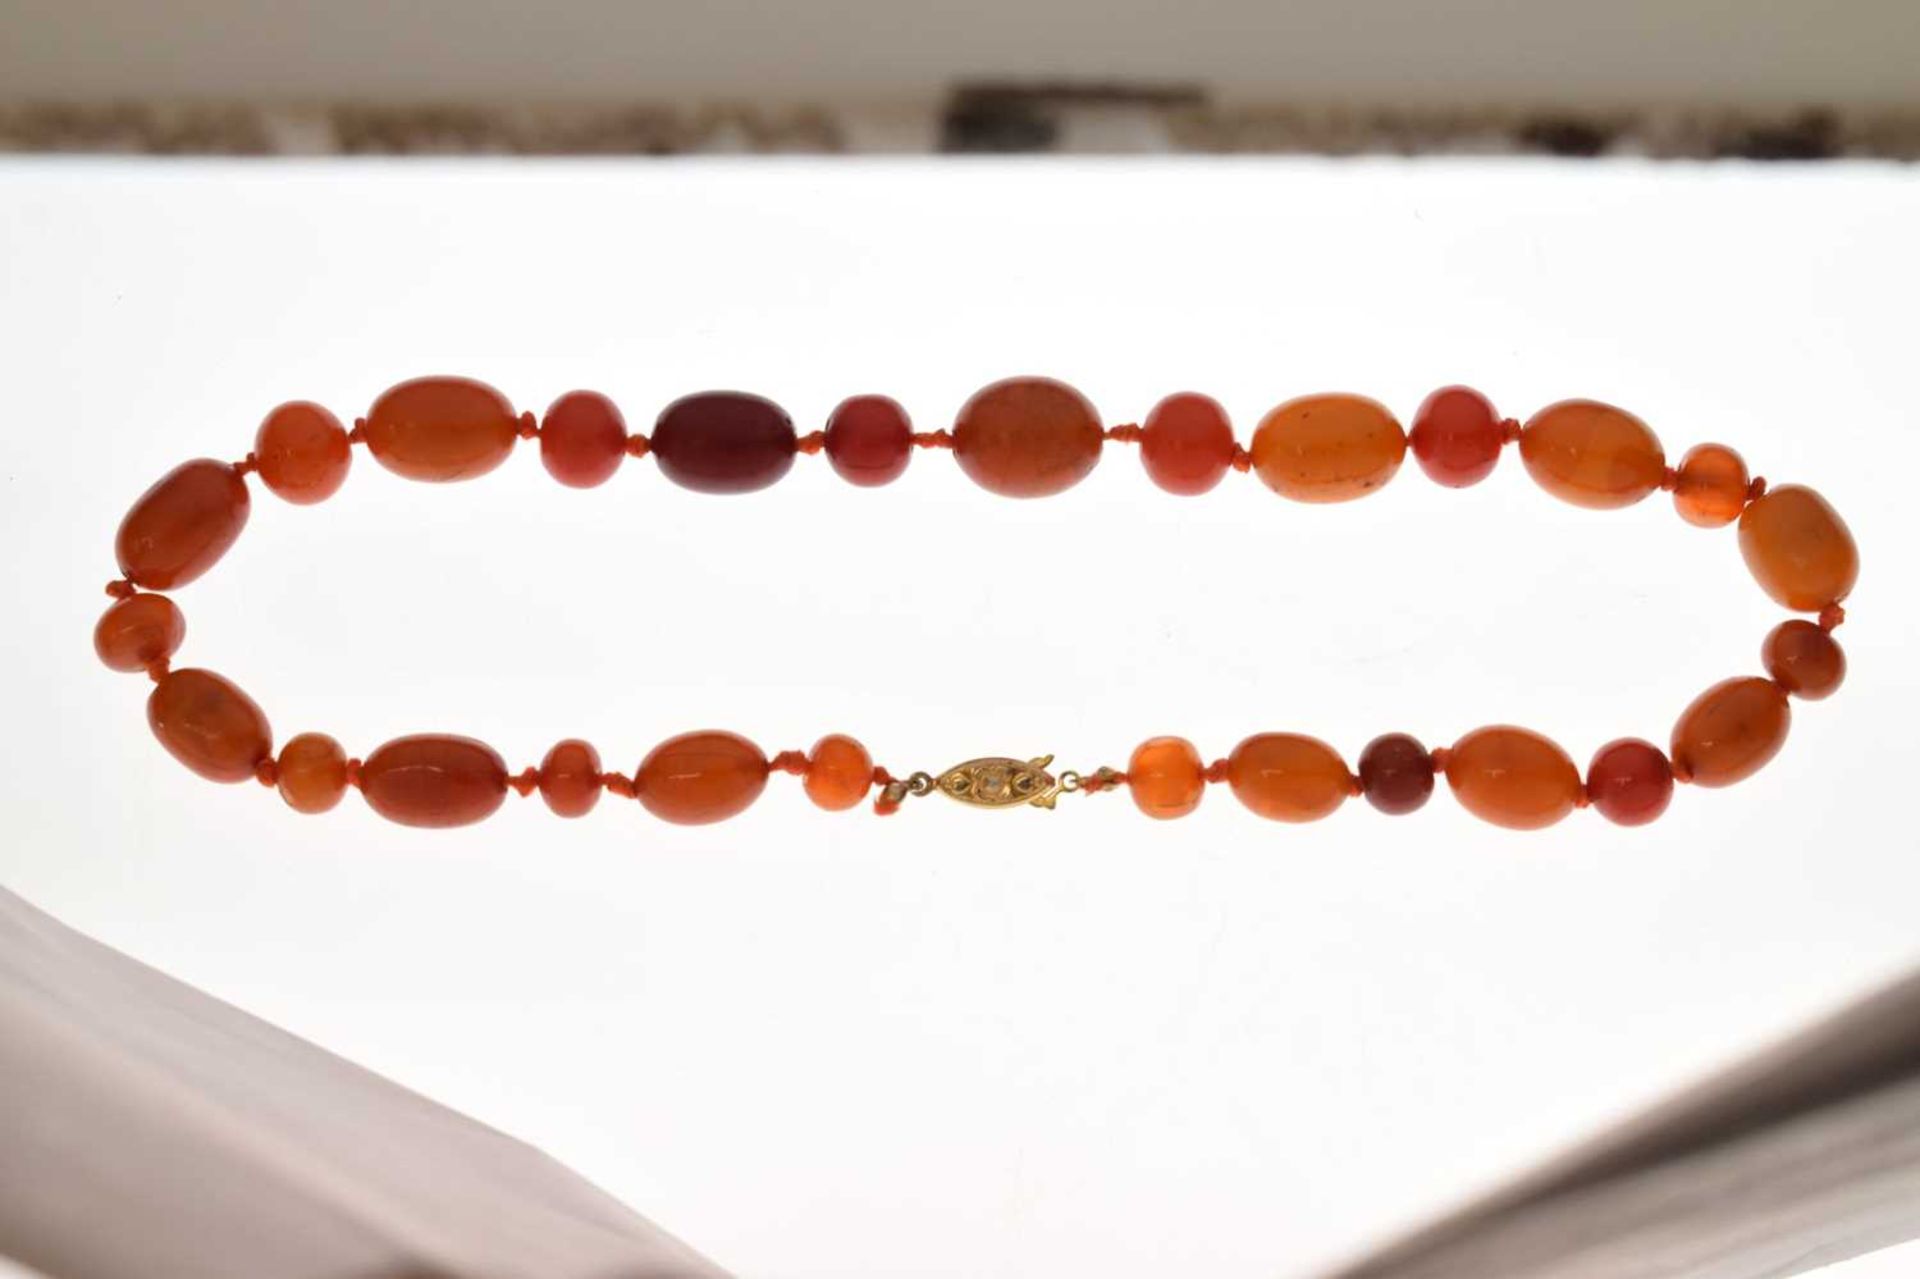 'Butterscotch amber' coloured bead necklace - Image 12 of 12